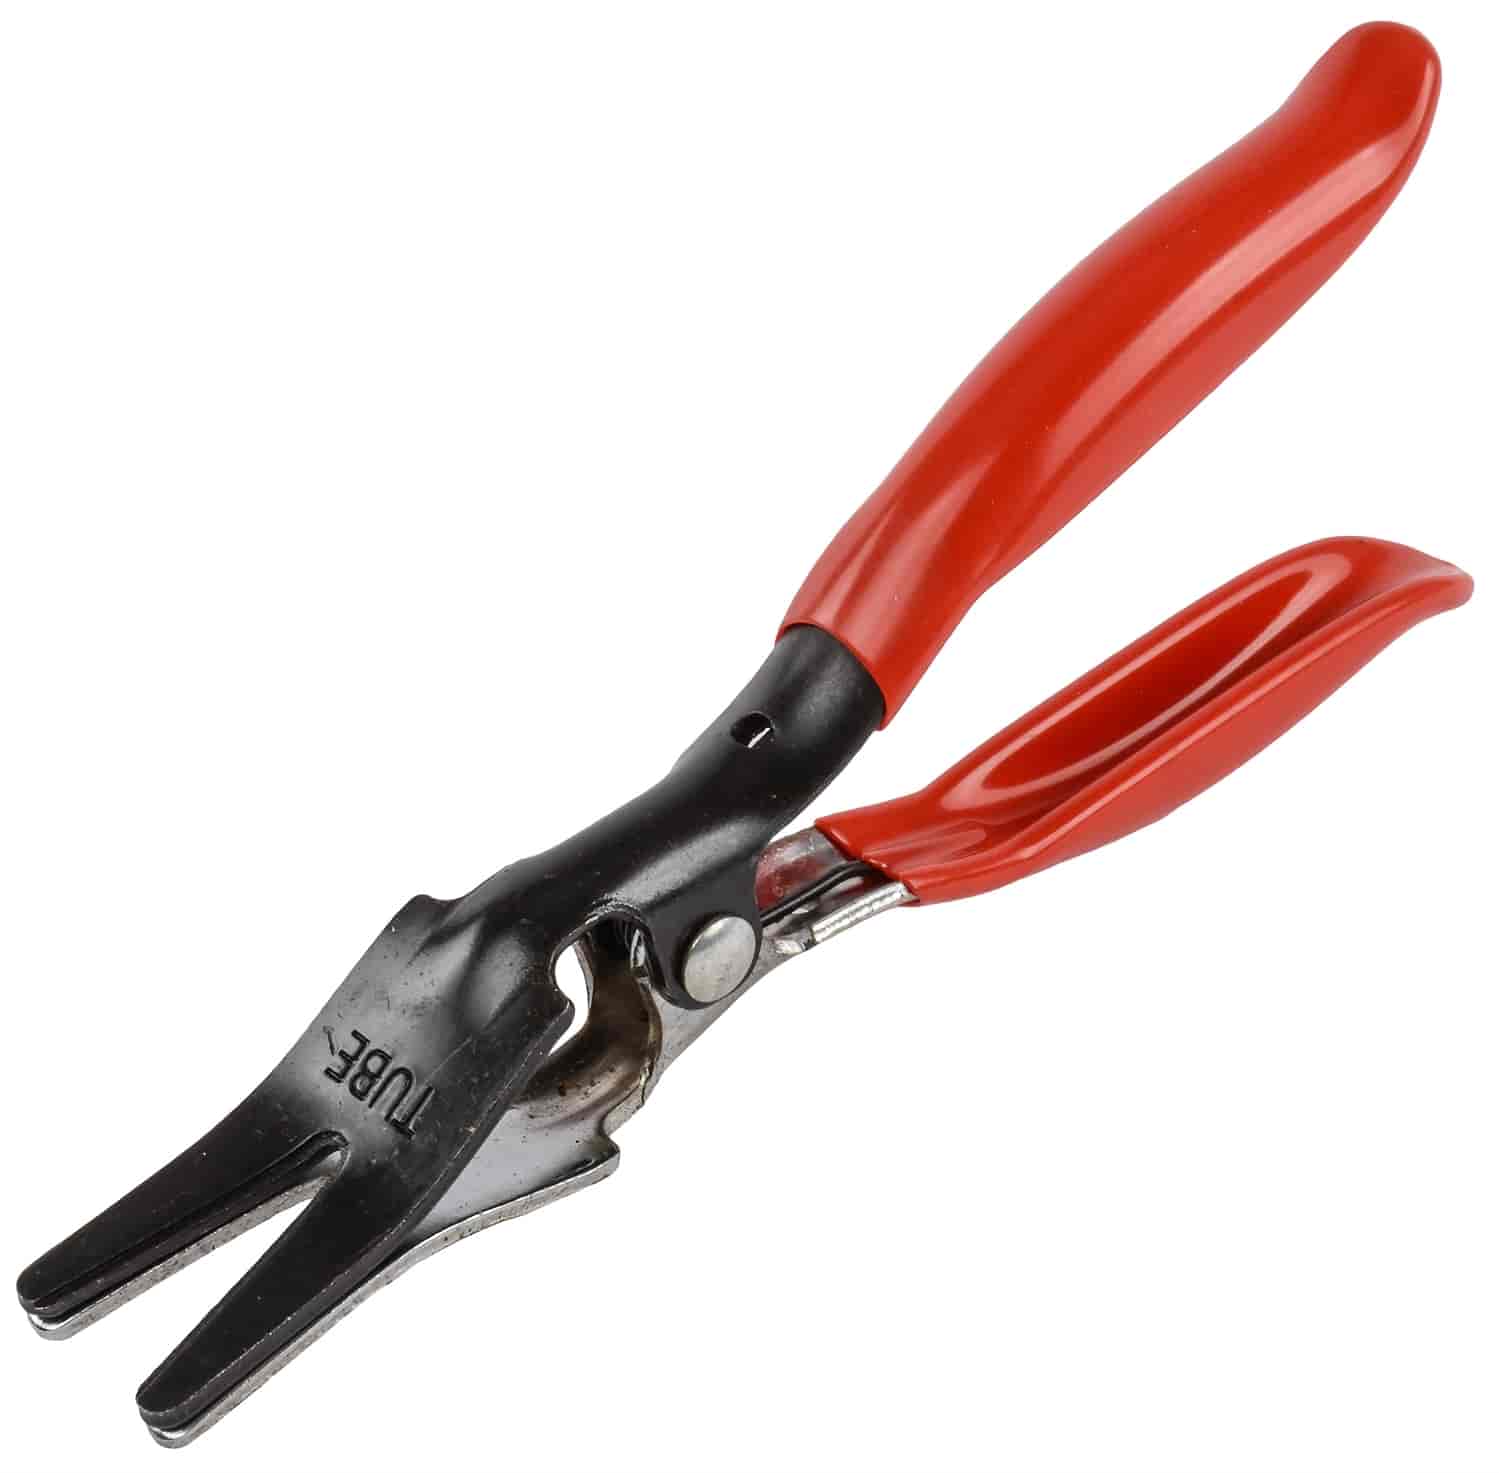 JEGS 80557: Hose Removal Pliers for 5/32 in. to 1/2 in. Hose - JEGS